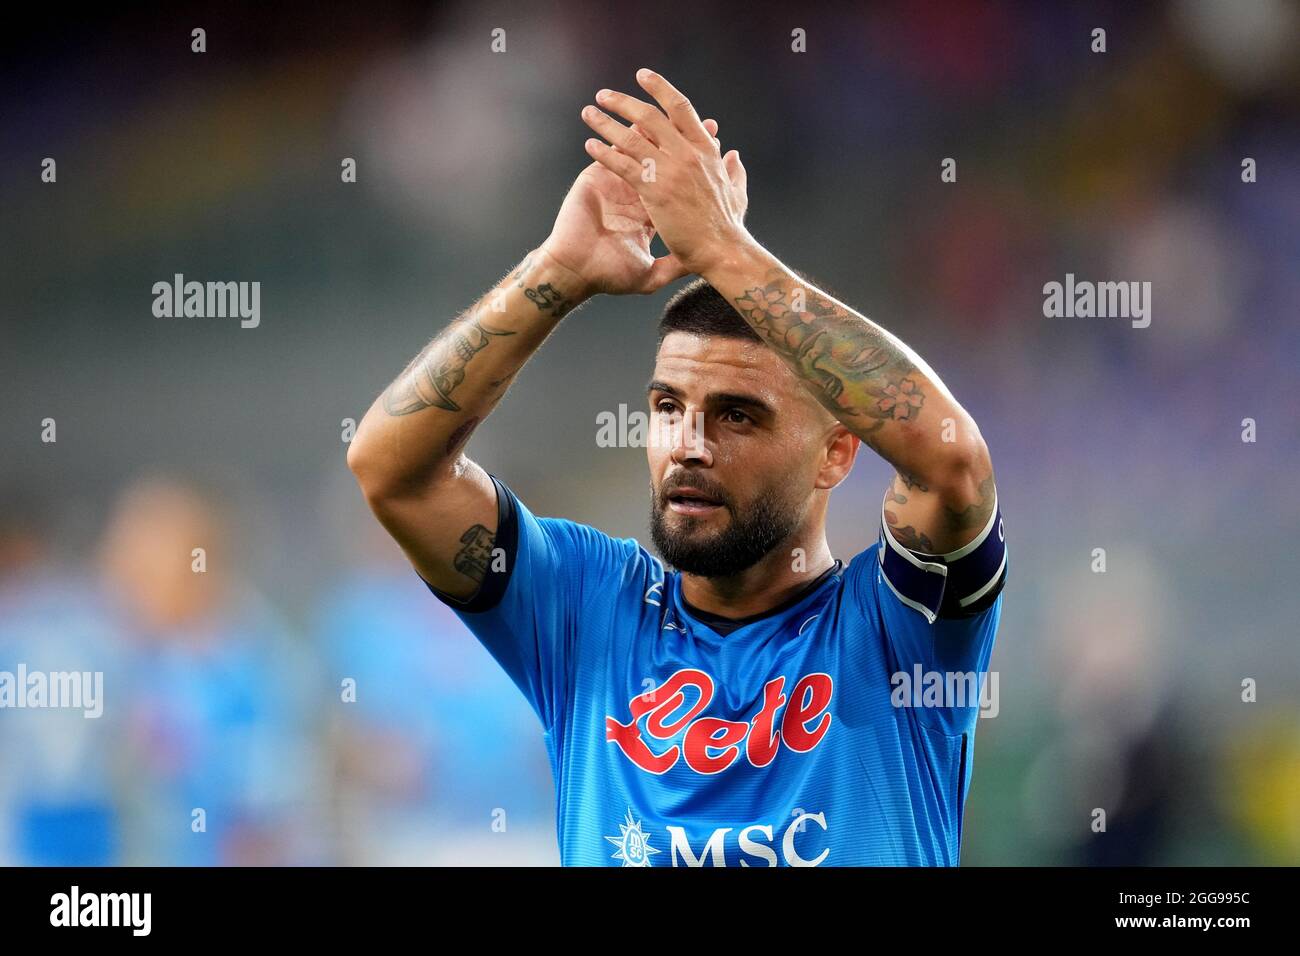 GENOA, ITALY - AUGUST 29: Lorenzo Insigne of SSC Napoli celebrates the win ,during the Serie A match between Genoa CFC and SSC Napoli at Stadio Luigi Ferraris on August 29, 2021 in Genoa, . (Photo by MB Media) Stock Photo